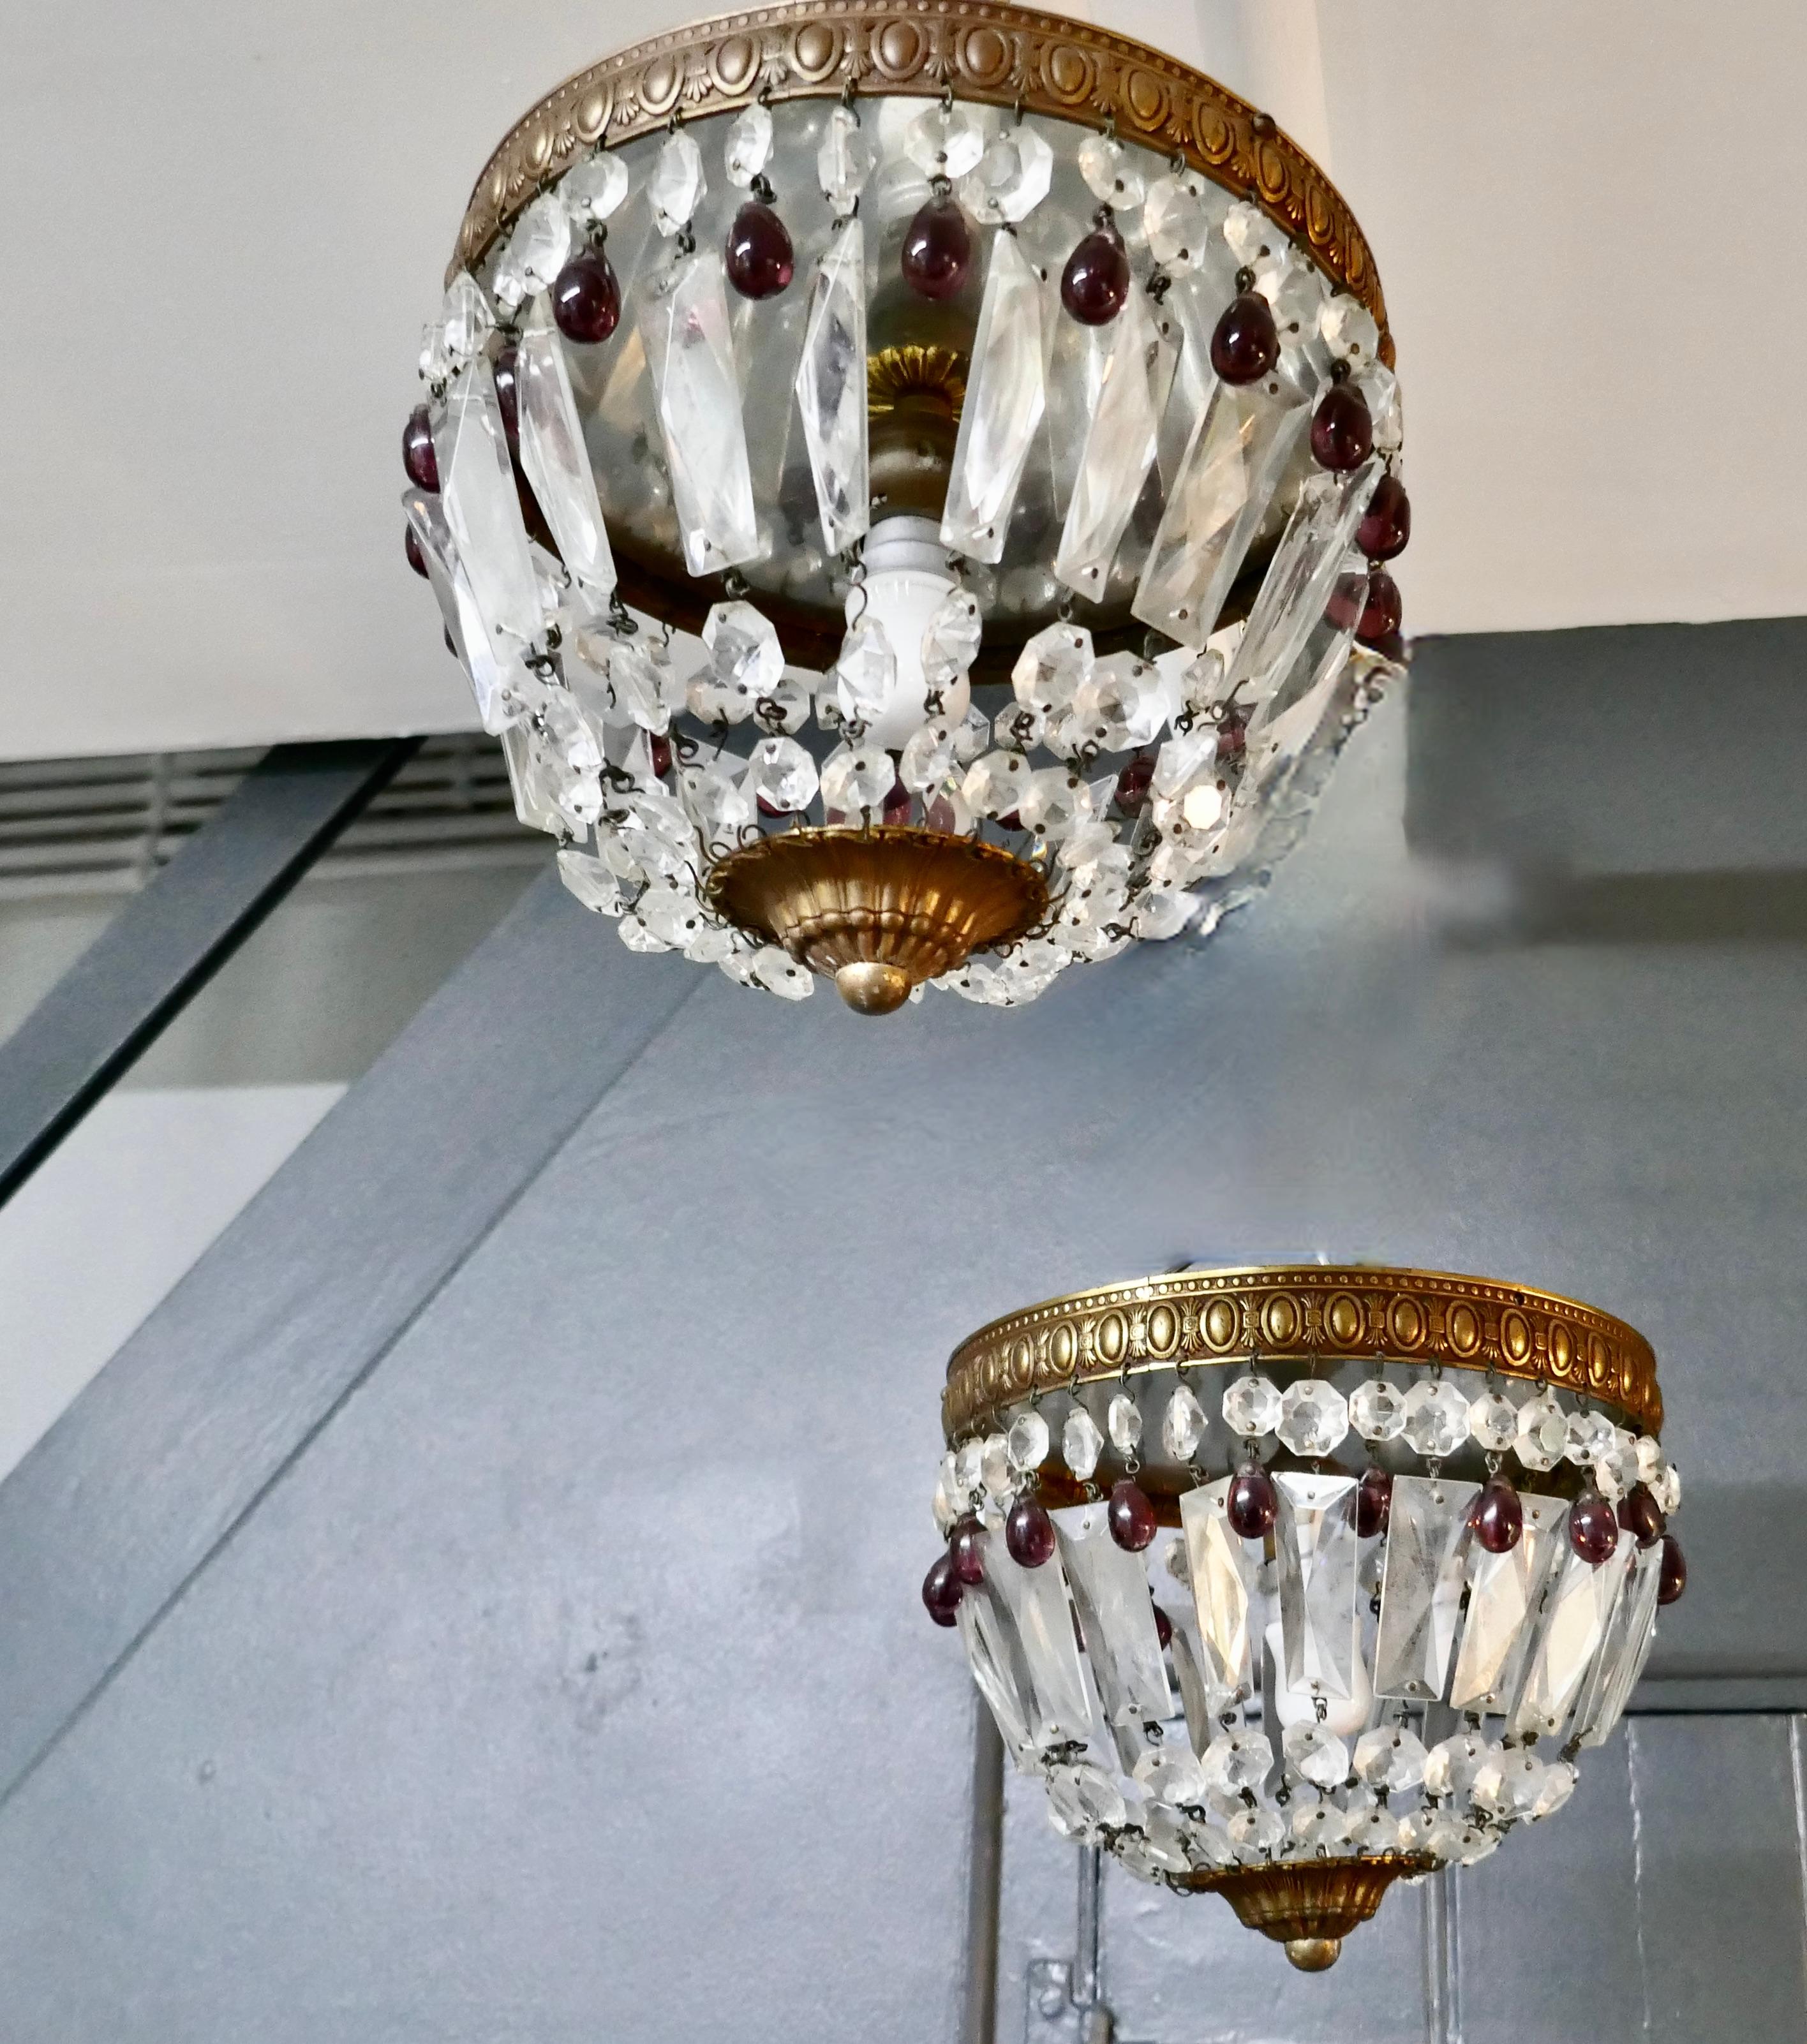 A pair of small French Empire style crystal basket chandeliers

This is a lovely pair they have an aged brass frame hung with crystal chains forming a basket and alternate garnet crystal drops between 
The chandeliers are in good and working